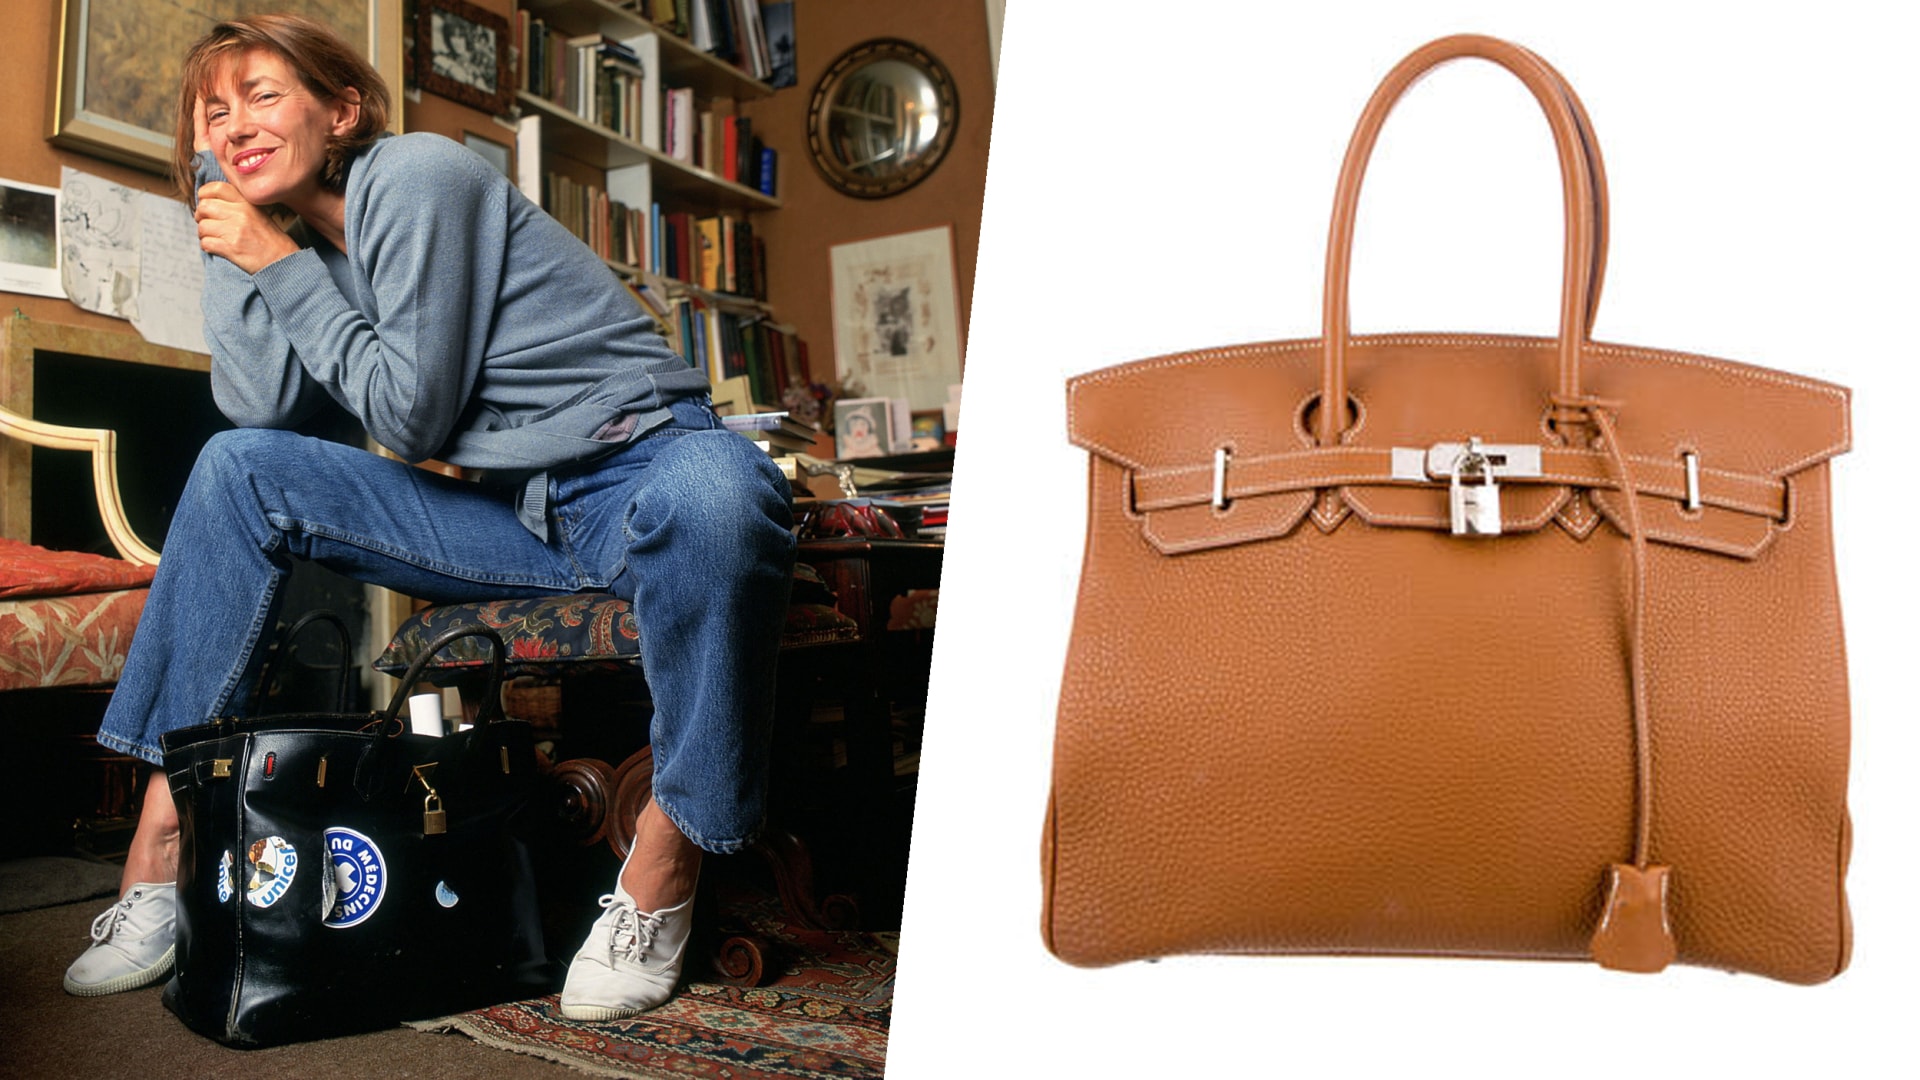 Jane Birkin, Grace Kelly and purses named after iconic women - 0